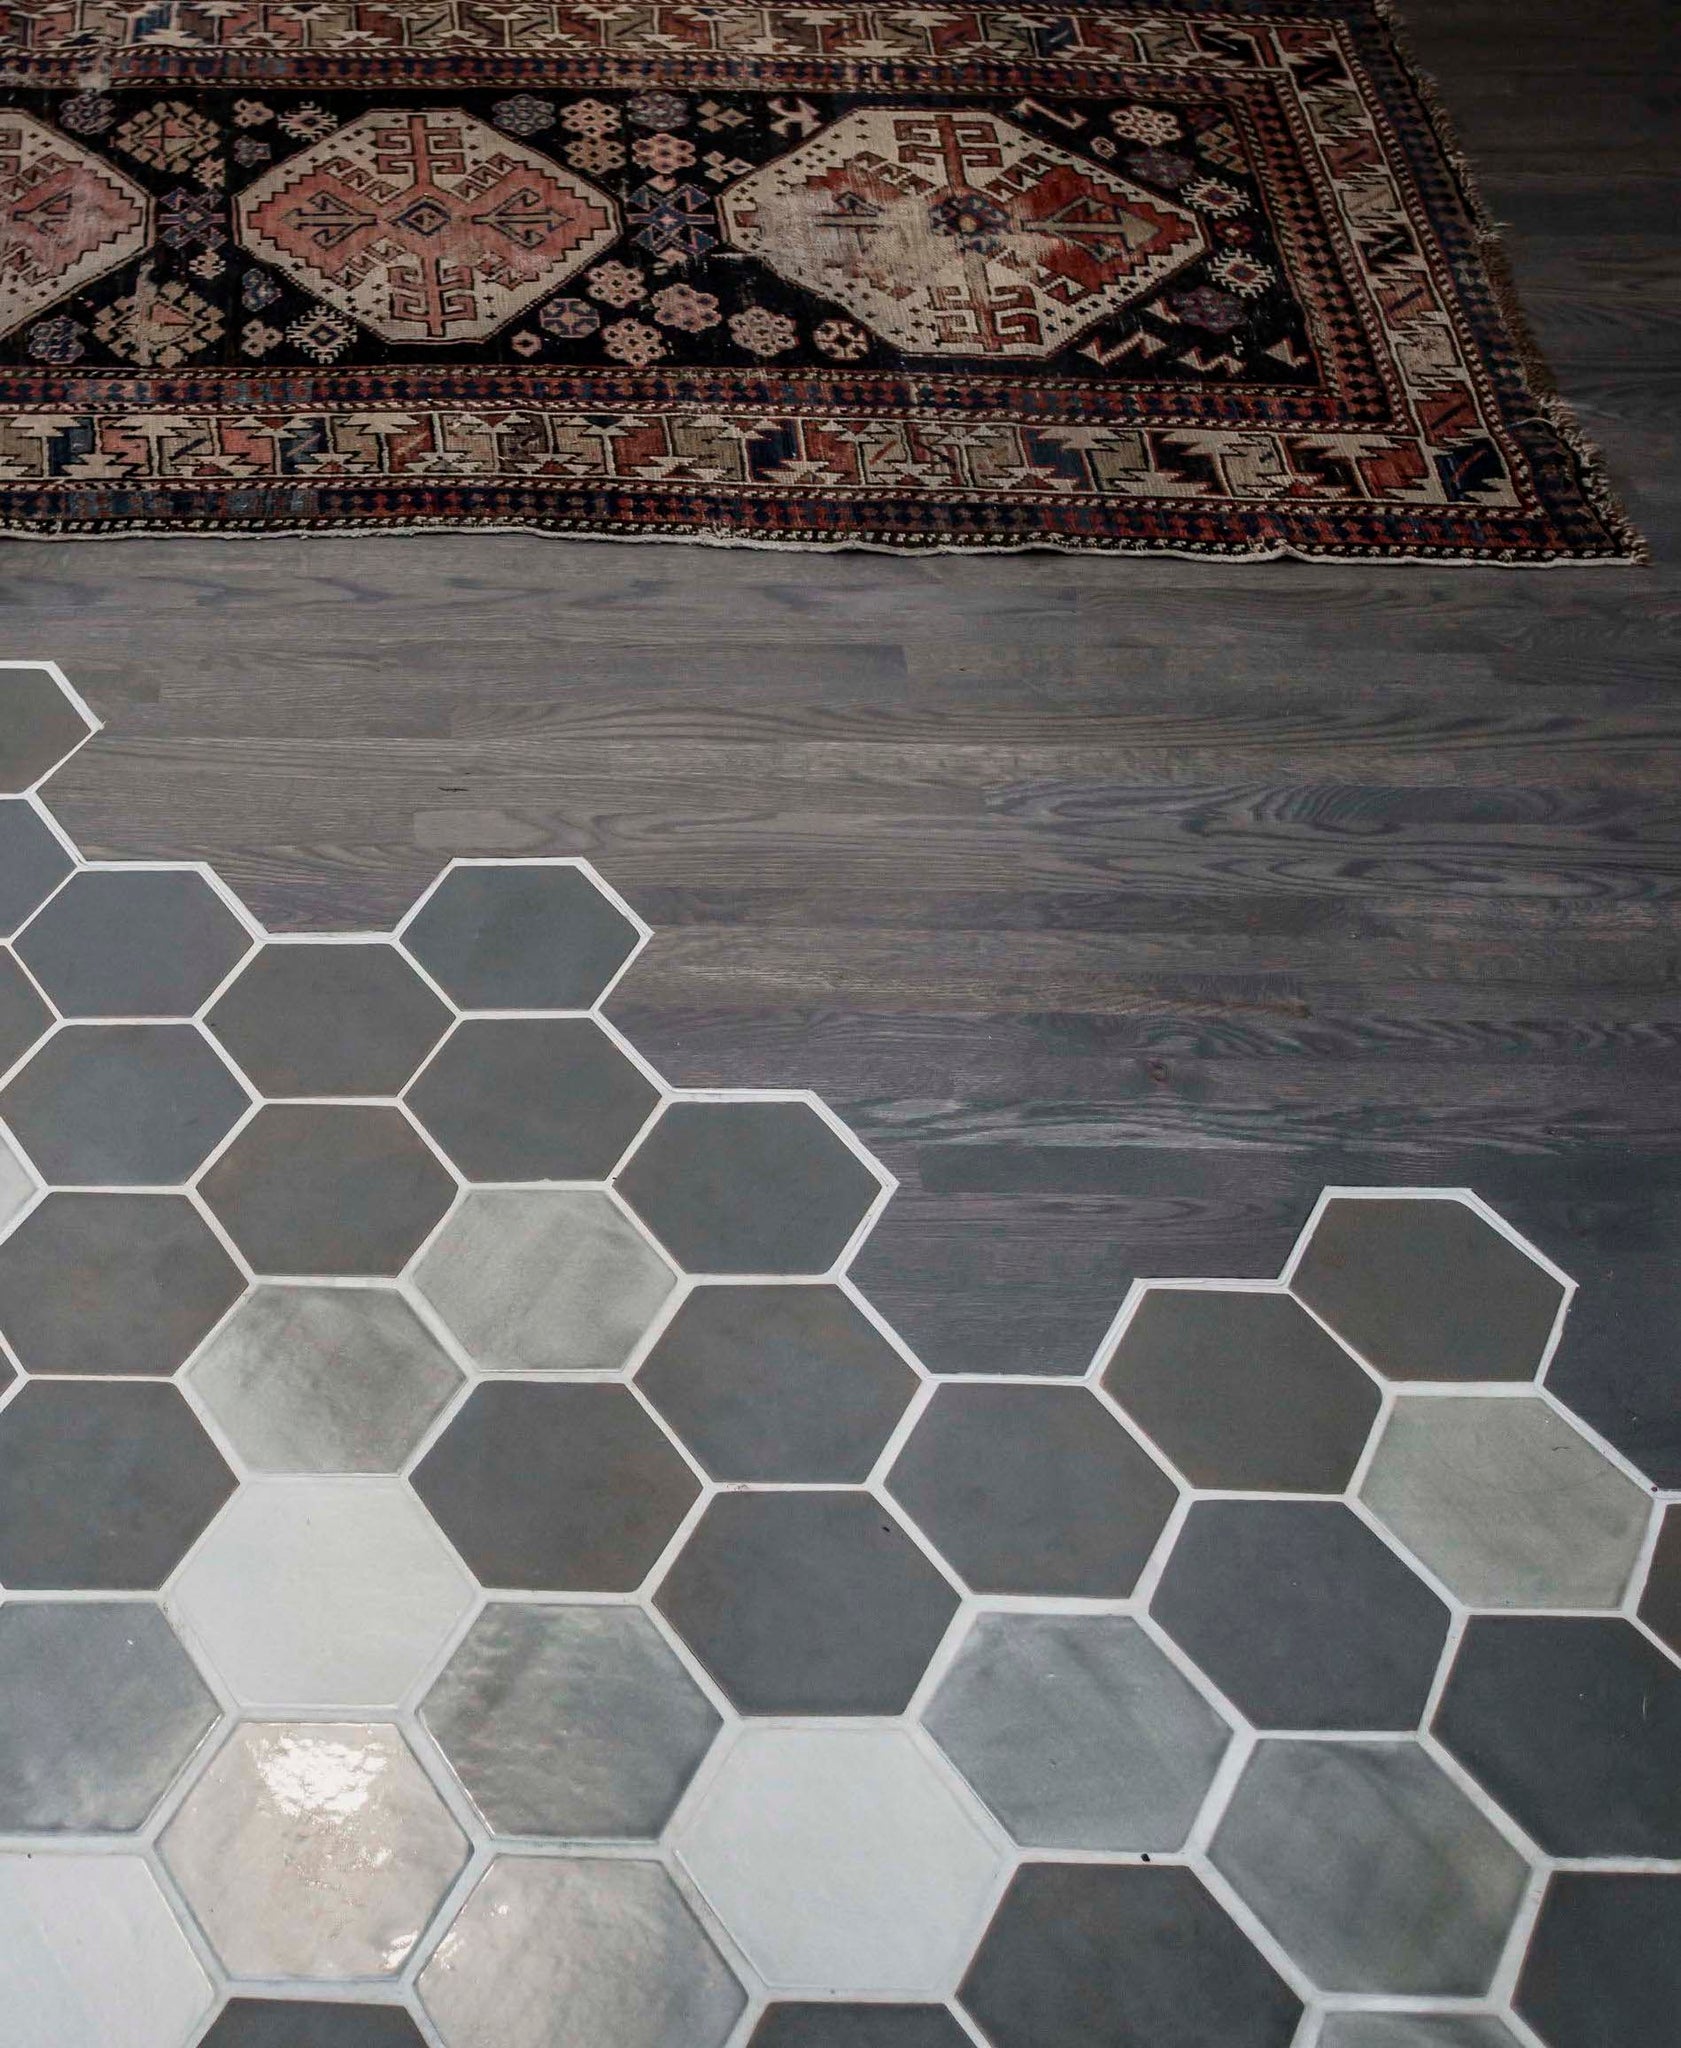 hexagon tile floor grey projects inspire tiles mosaic wood patterns sky layout 912r cloudy hexagons sooty 815w